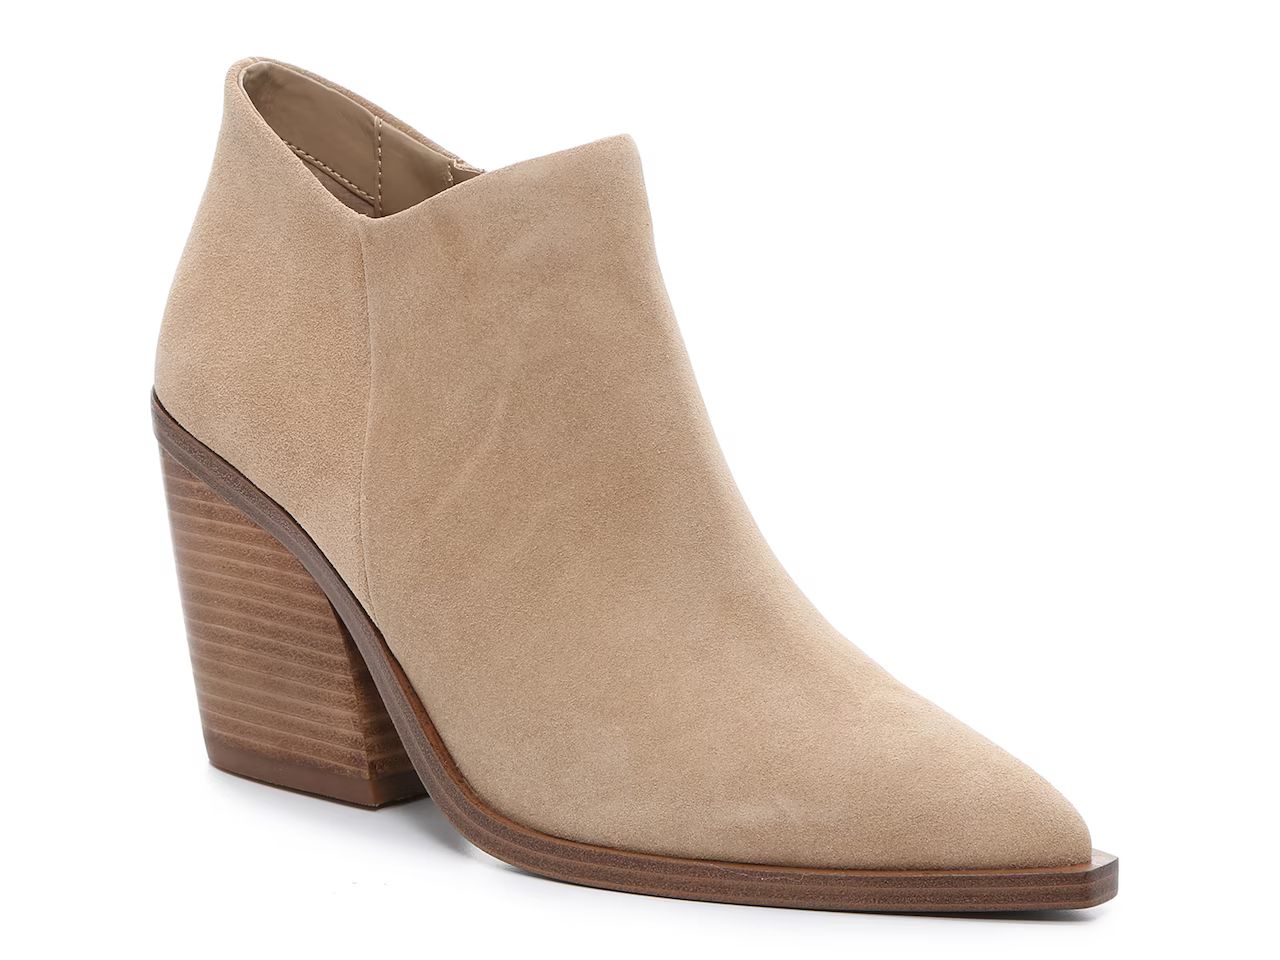 Vince Camuto Golivia Bootie | DSW